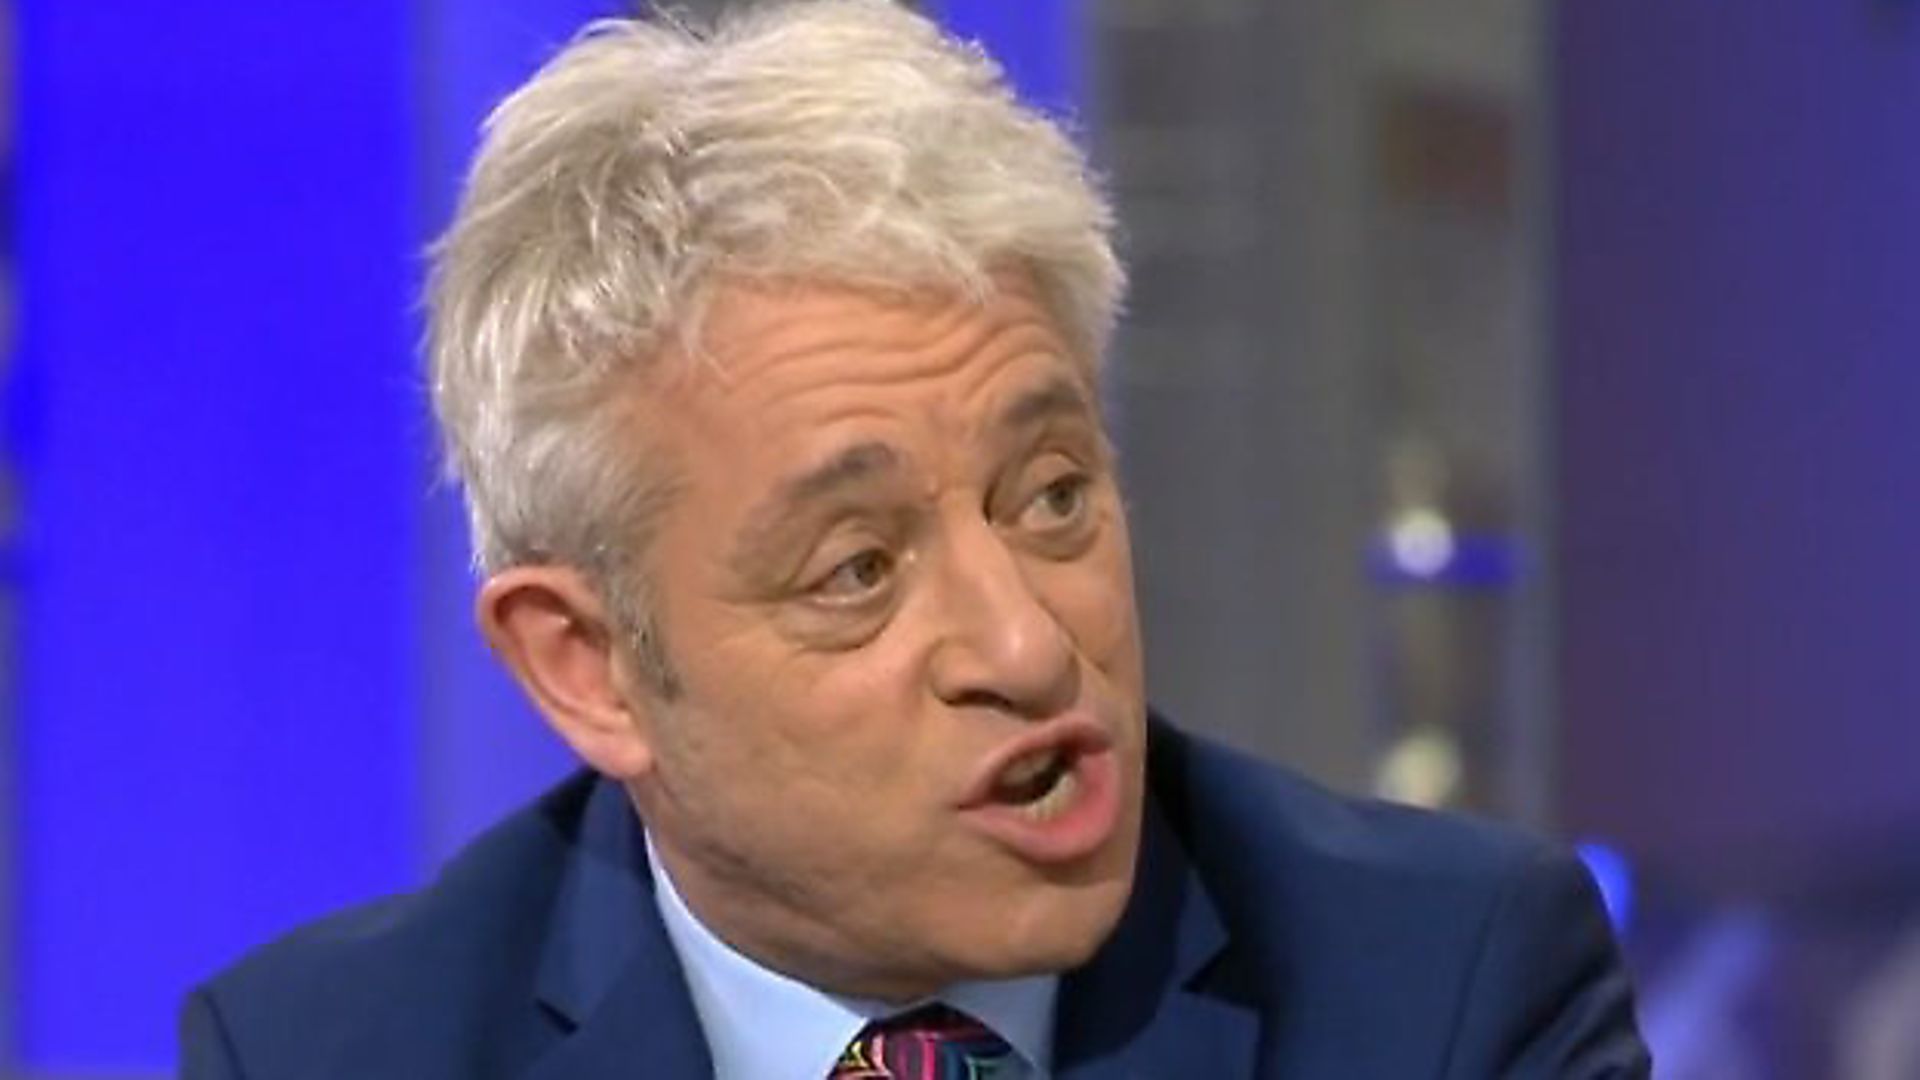 Bercow had quite the put-down for Andrea Leadsom on election night. Picture: Sky - Credit: Sky